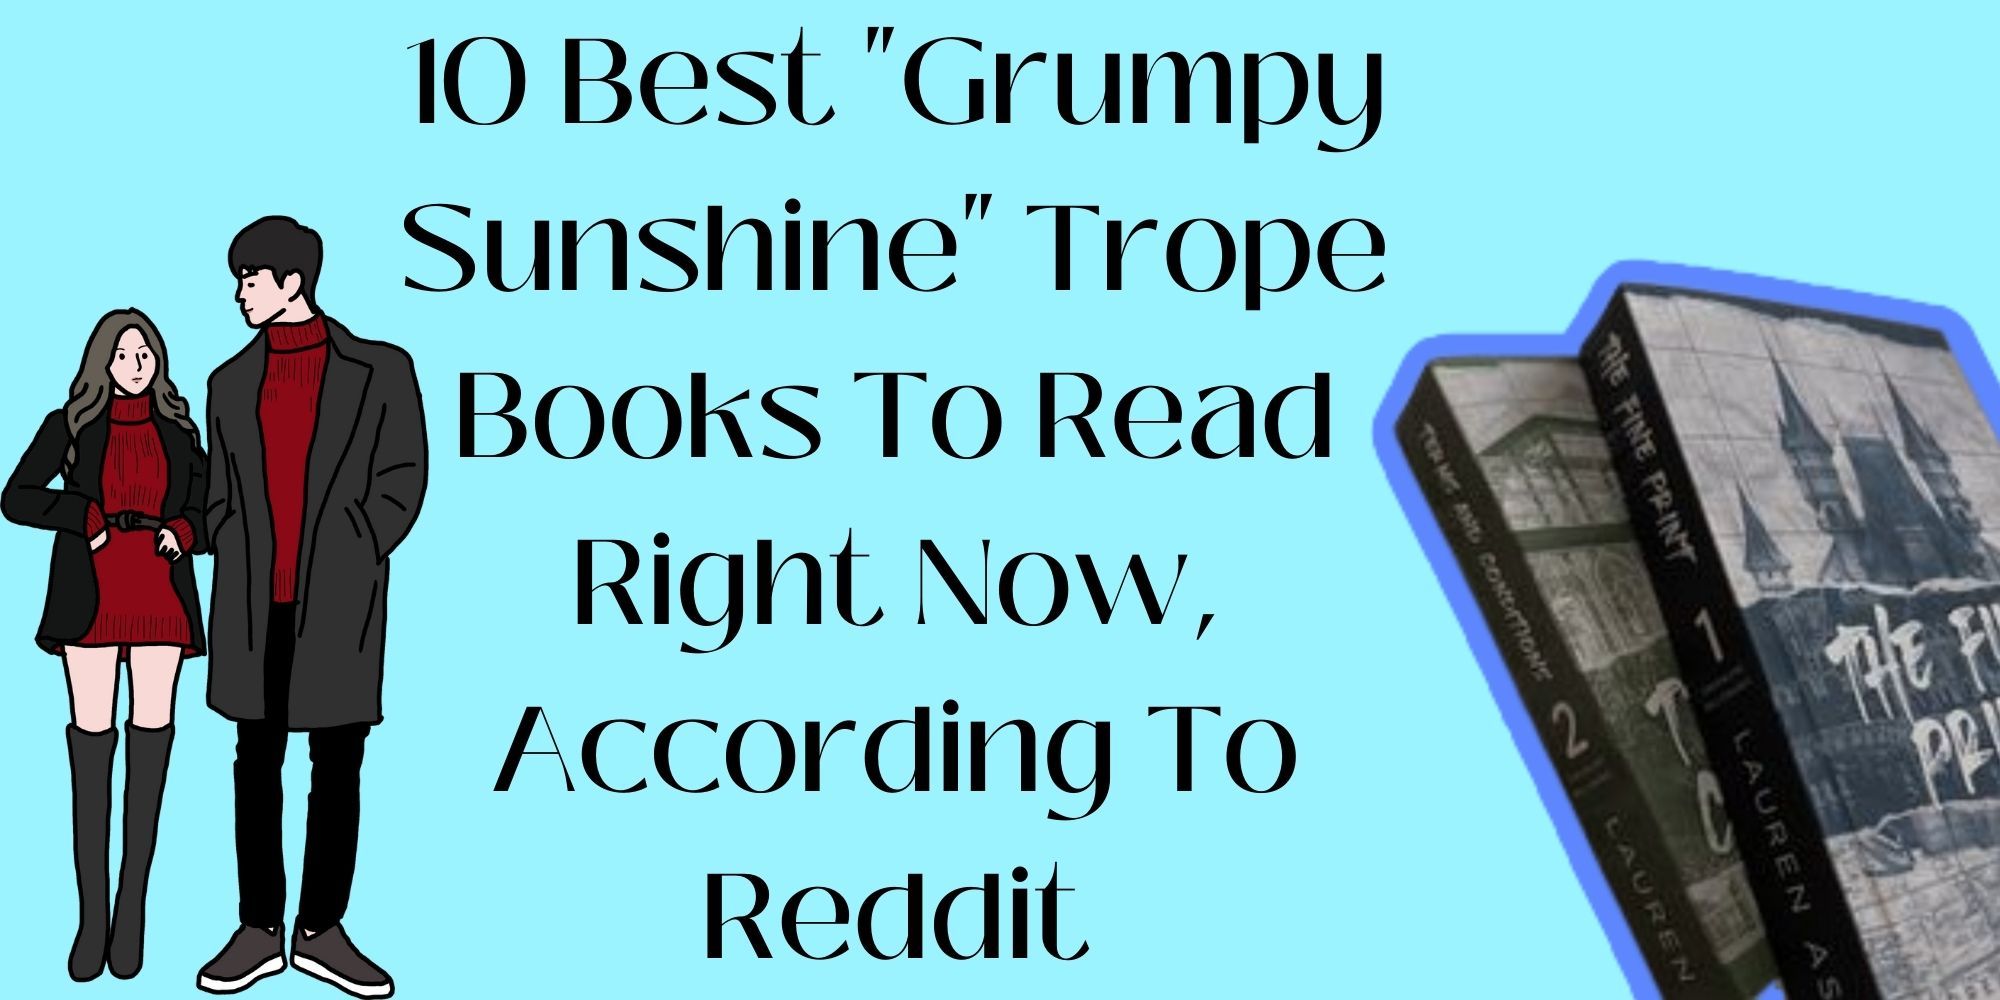 10 Best  Grumpy Sunshine  Trope Books To Read Right Now According To Reddit 